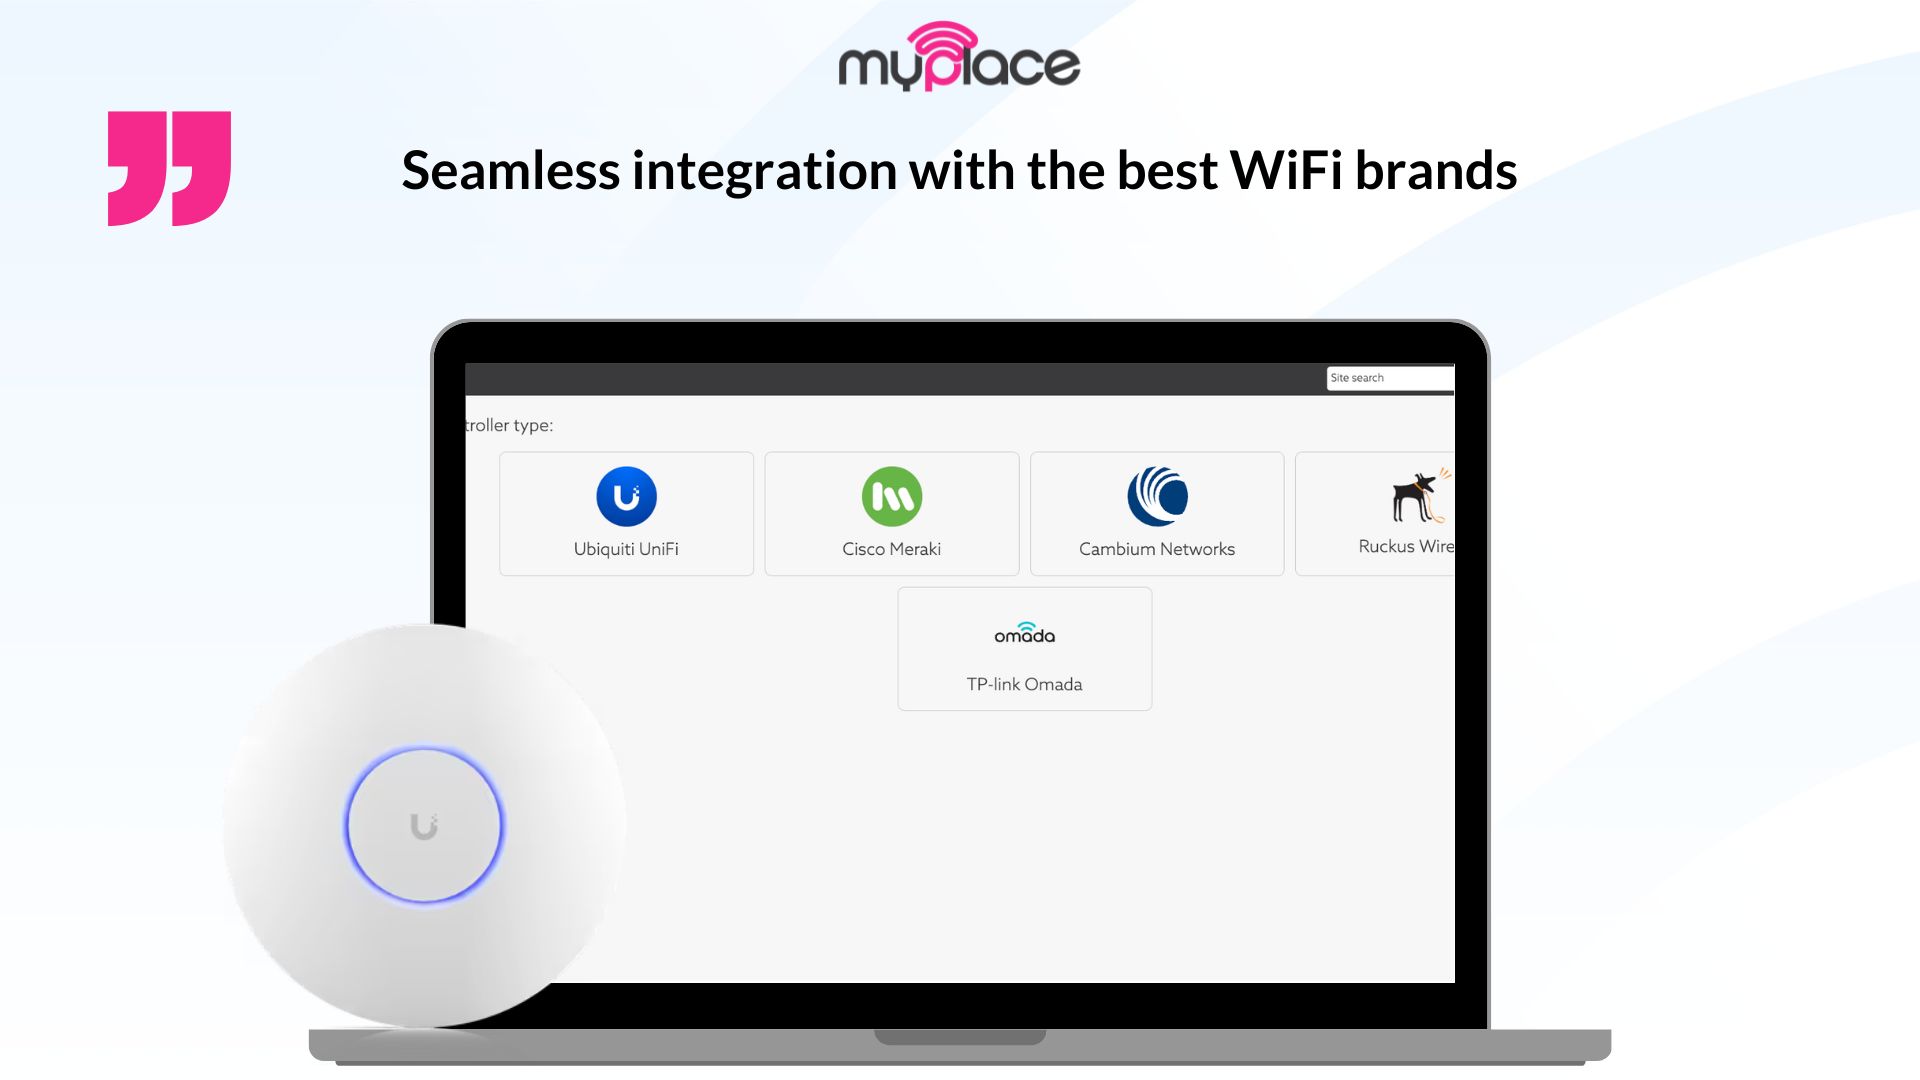 Seamless integration with the best WiFi brands